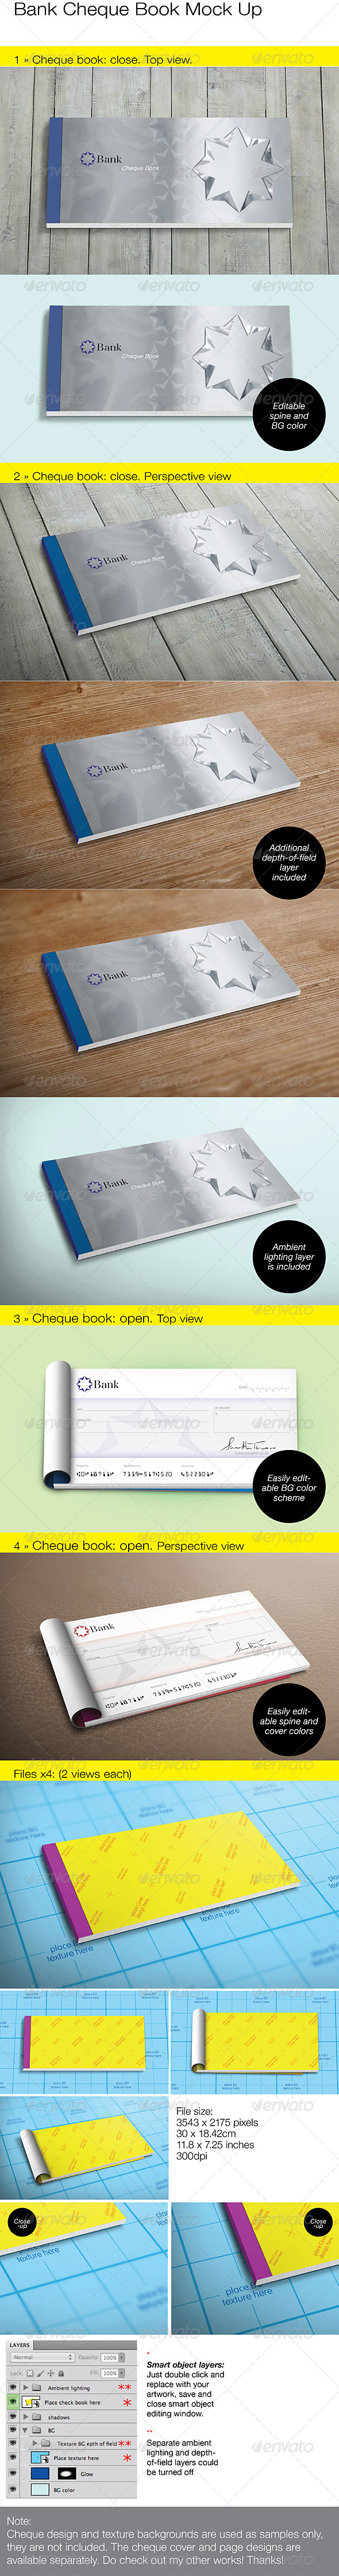 Bank Cheque Book Mock Up Preview.jpg